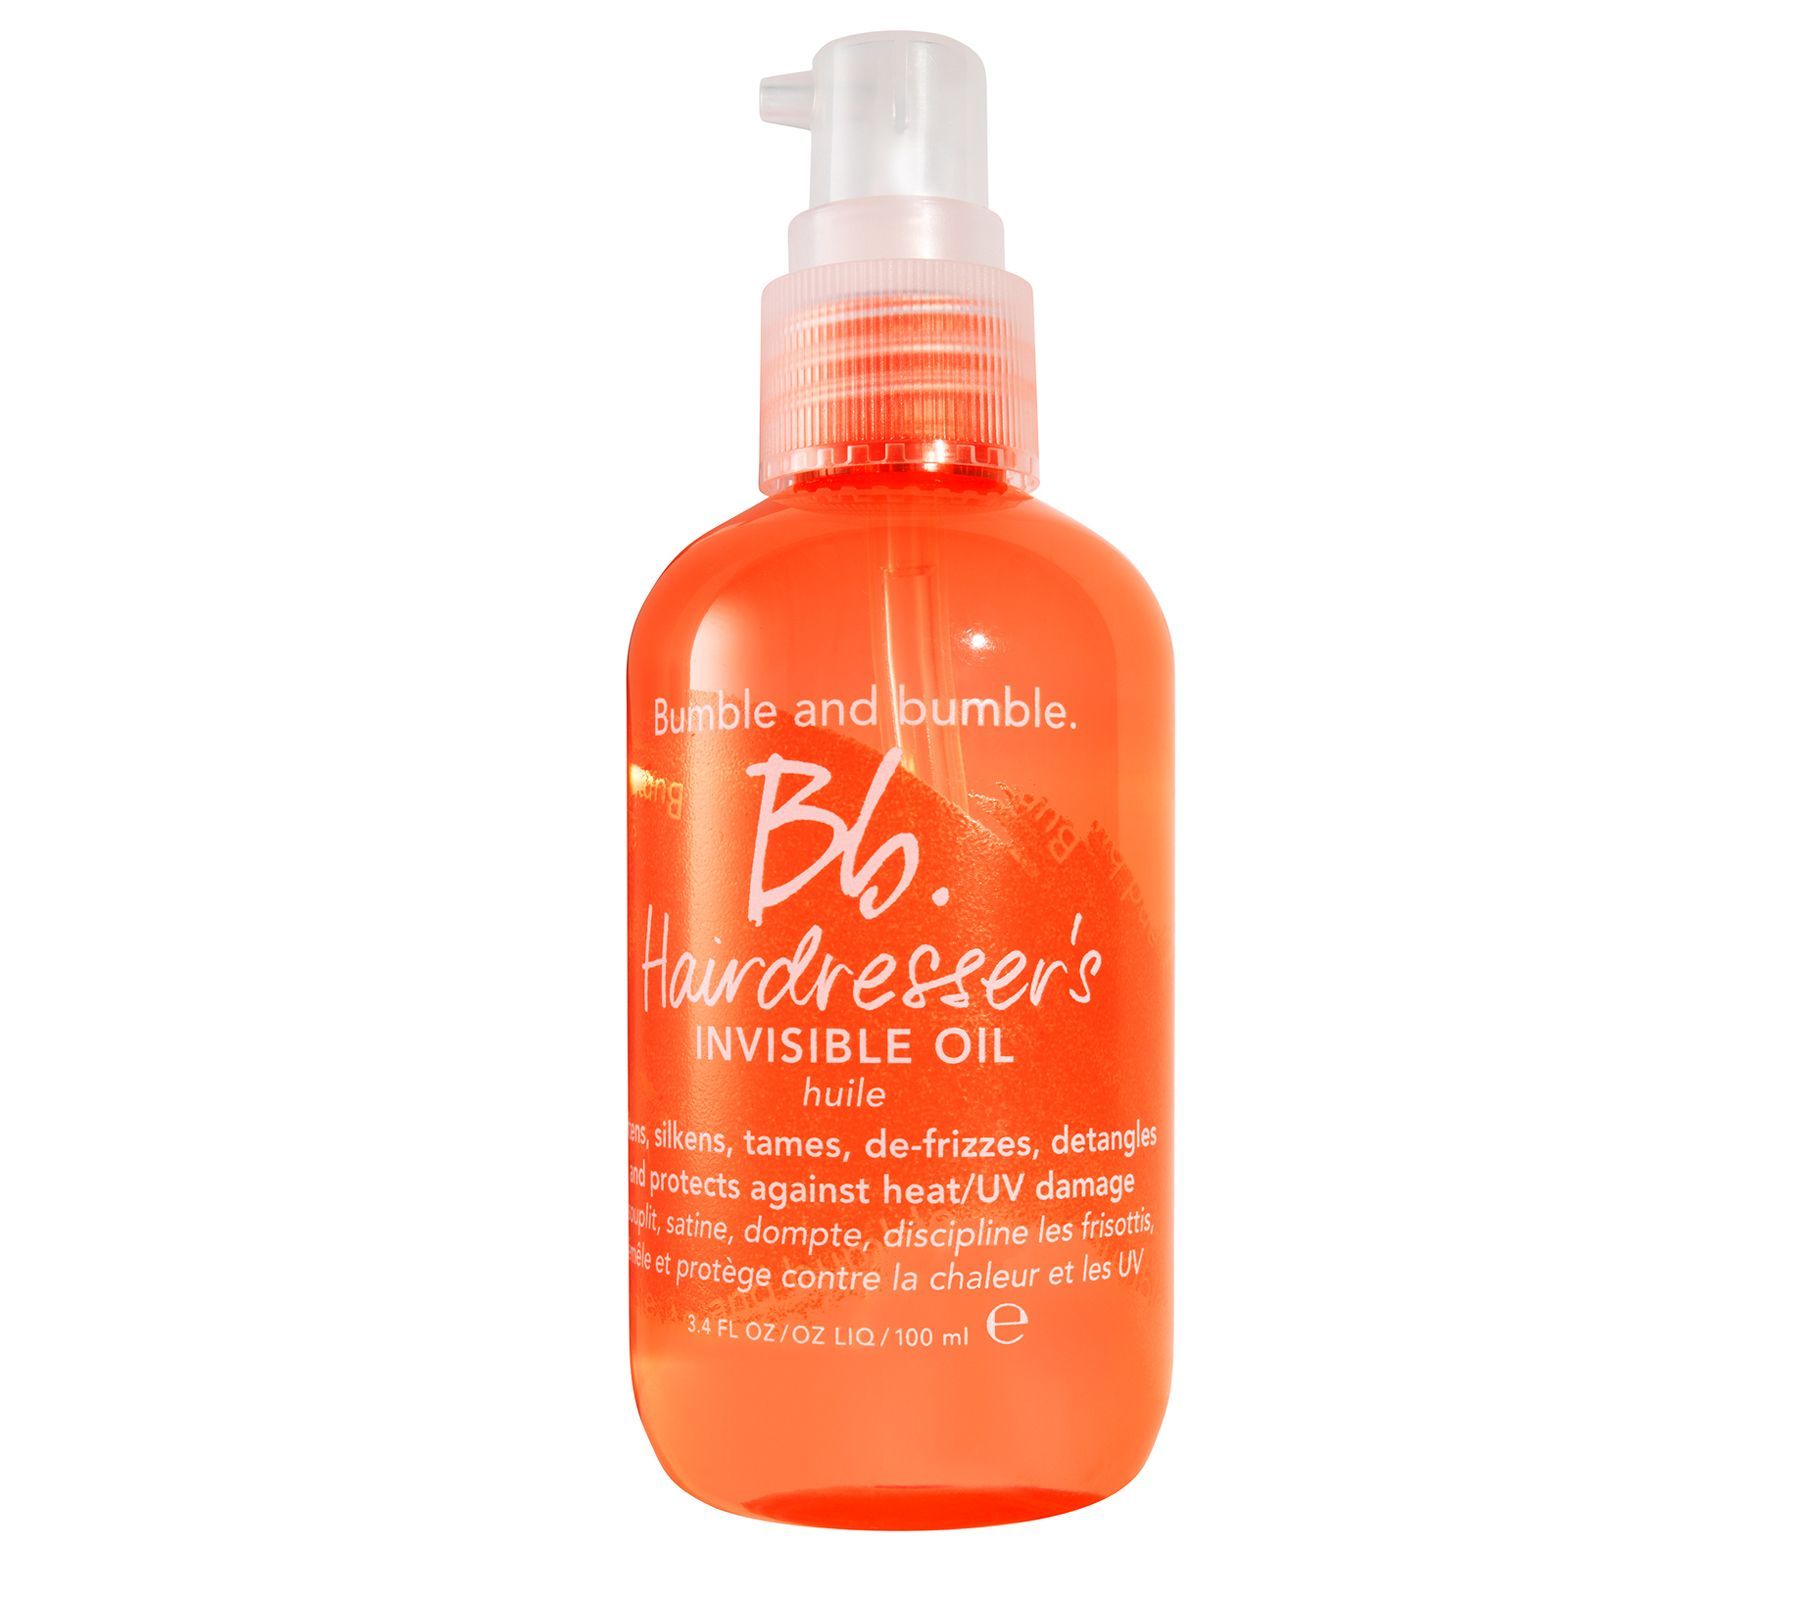 Bumble and bumble. Hairdresser's Invisible Oil3.4 oz - QVC.com | QVC